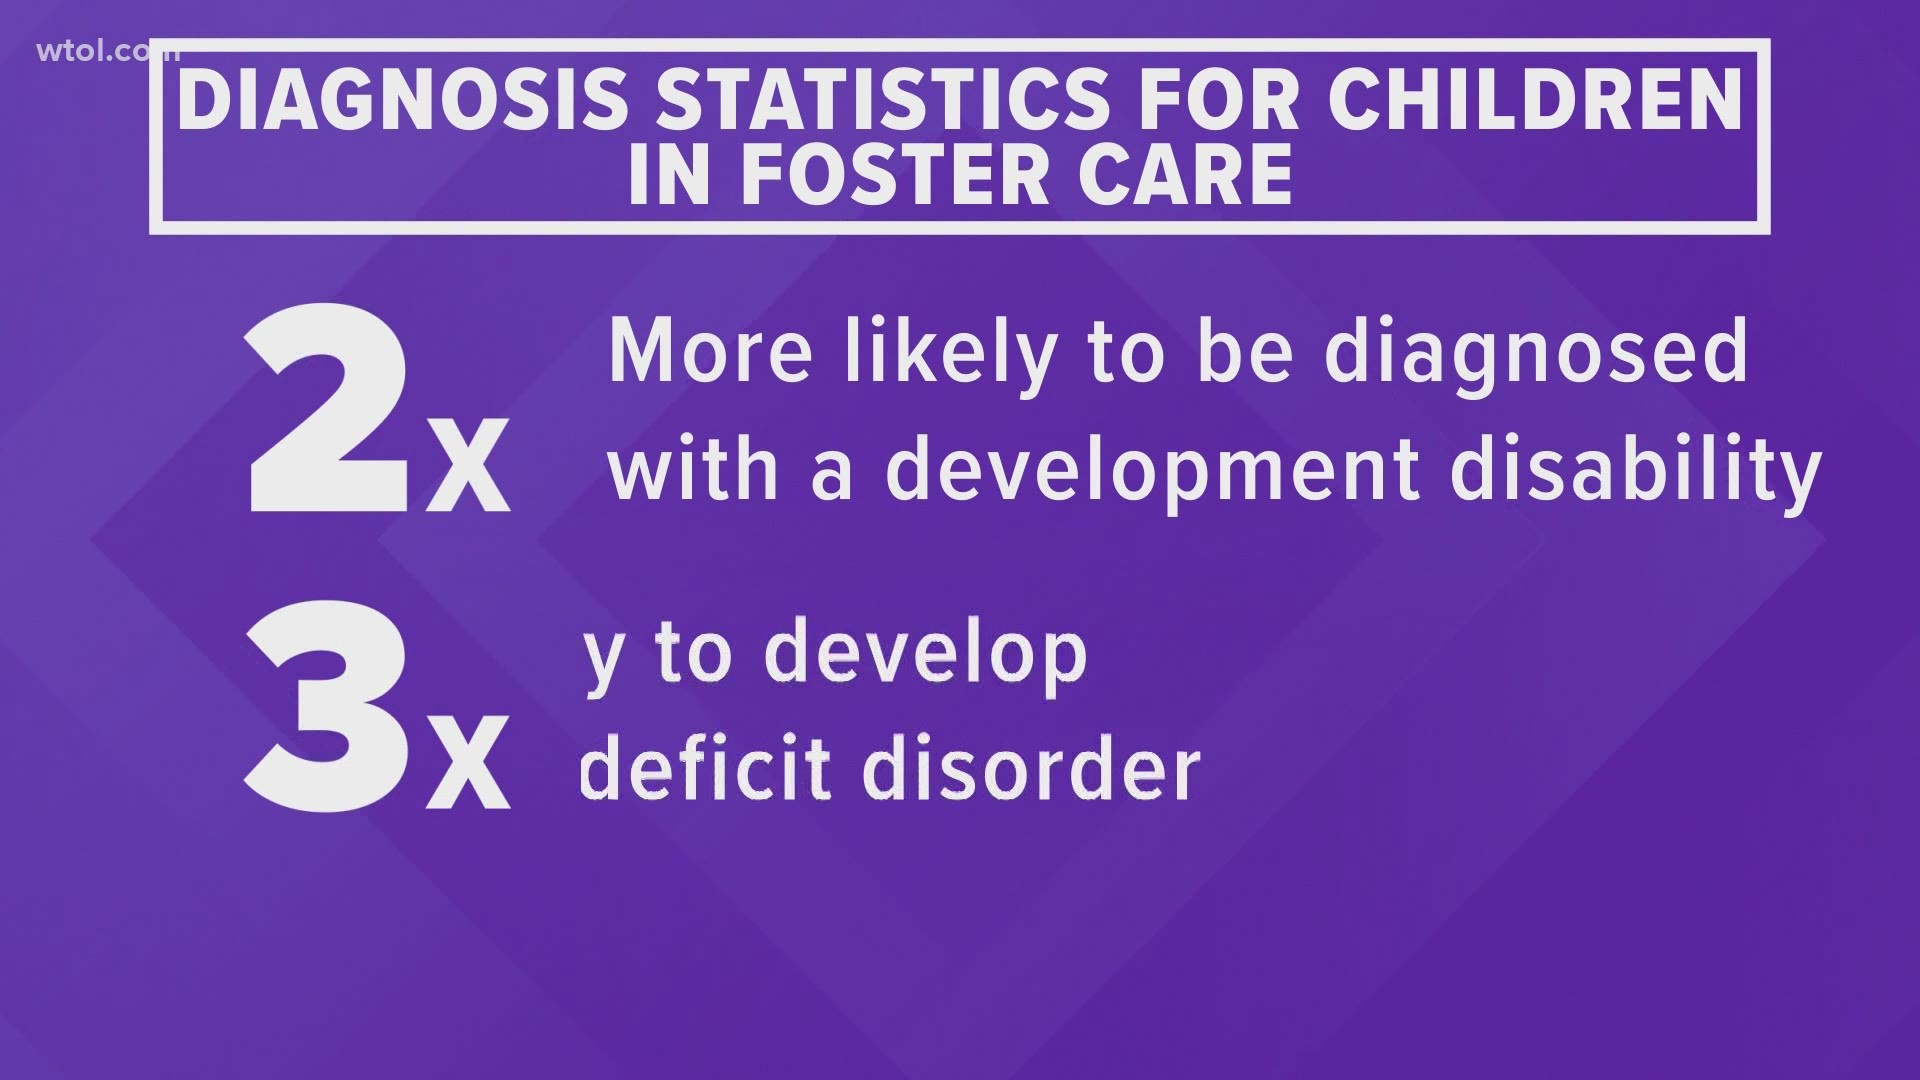 There's a growing number of kids entering foster care leading to an increased focus on providing them with support.